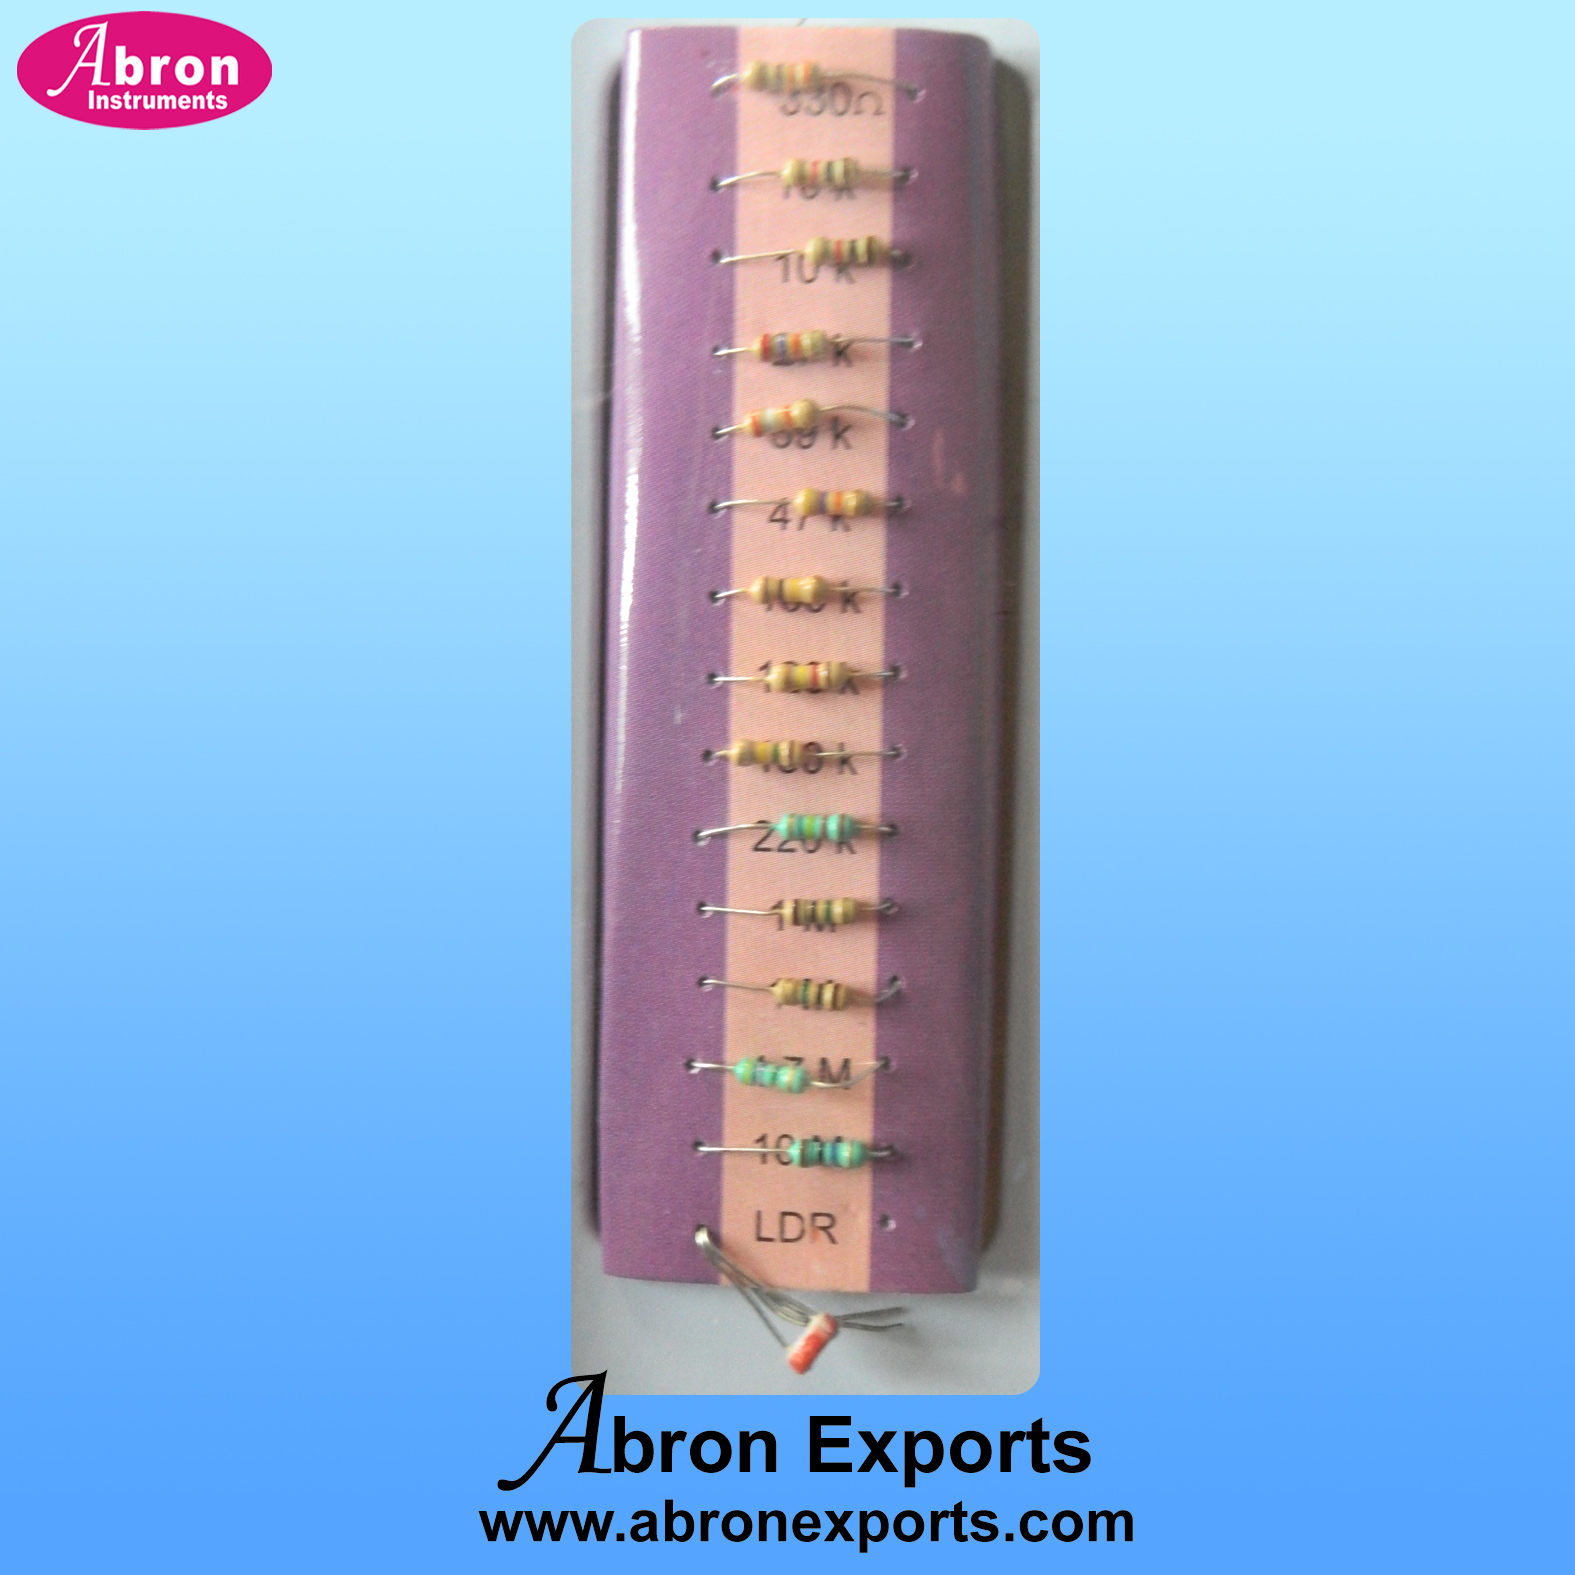 Electronic component abron kit circuit spare loose resistances assorted ldr junior parts AE-1224RA